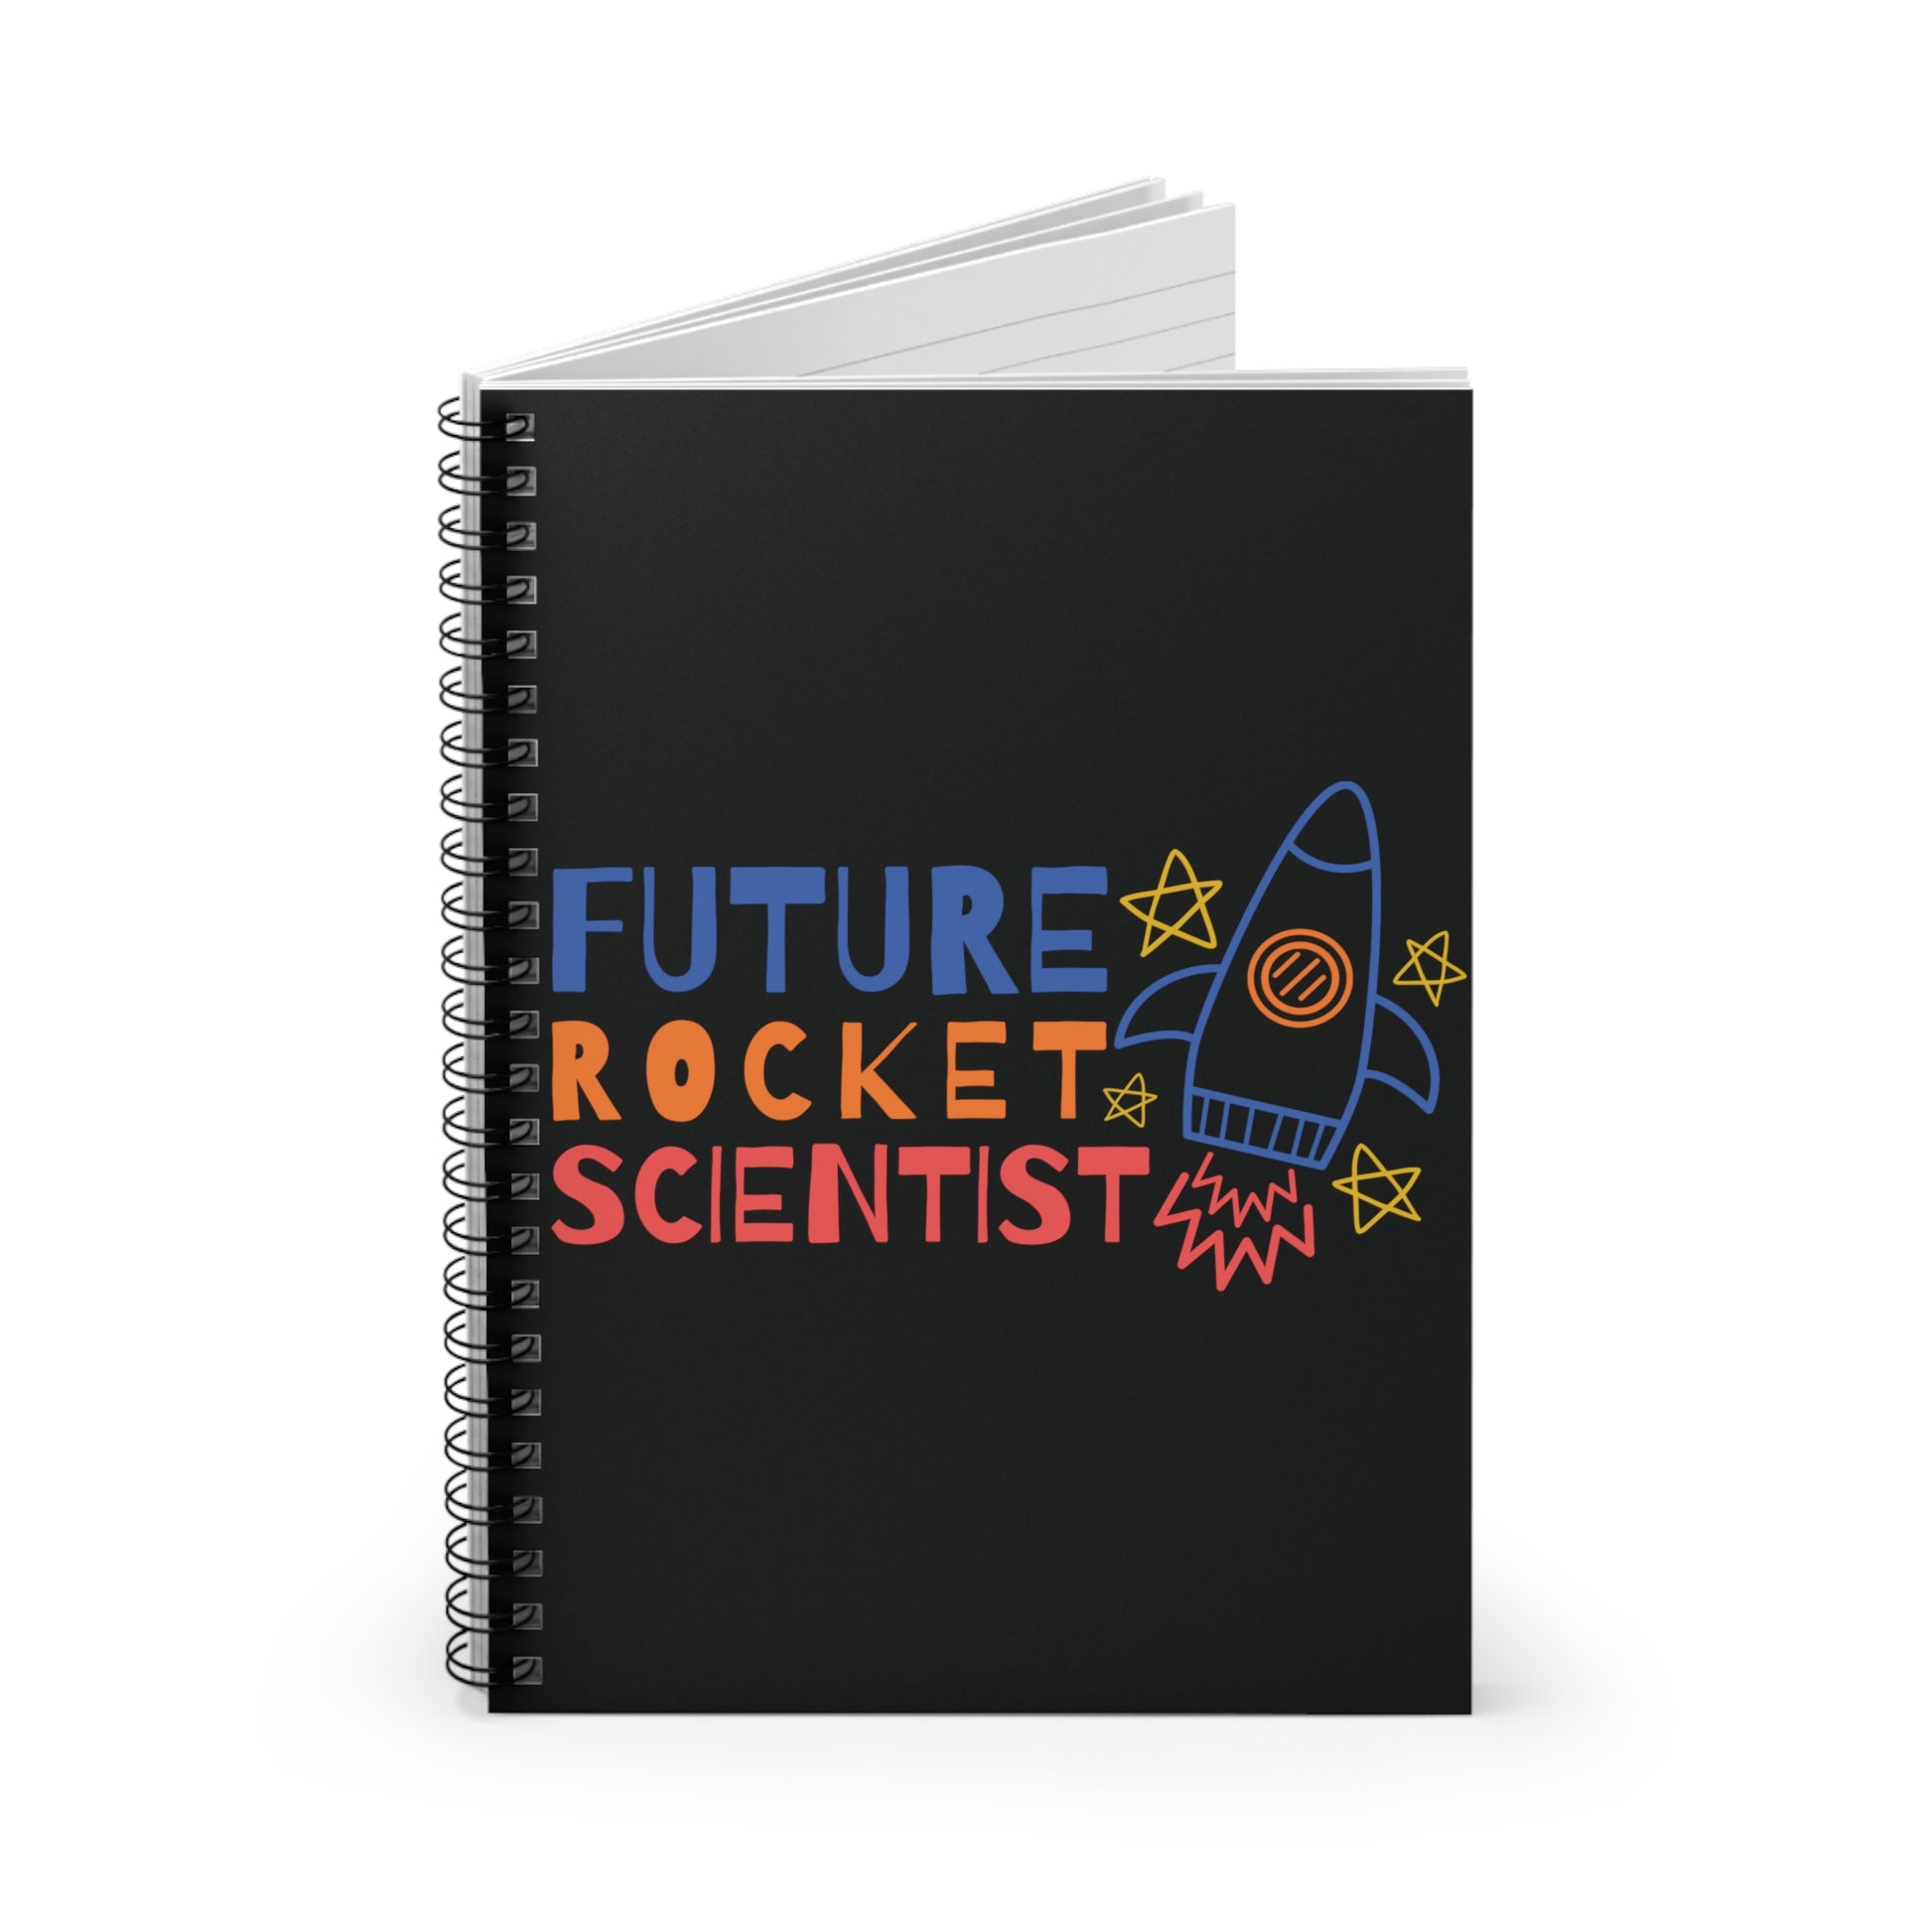 Future Rocket Scientist: Black Spiral Notebook - Log Books - Journals - Diaries - and More Custom Printed by TheGlassyLass